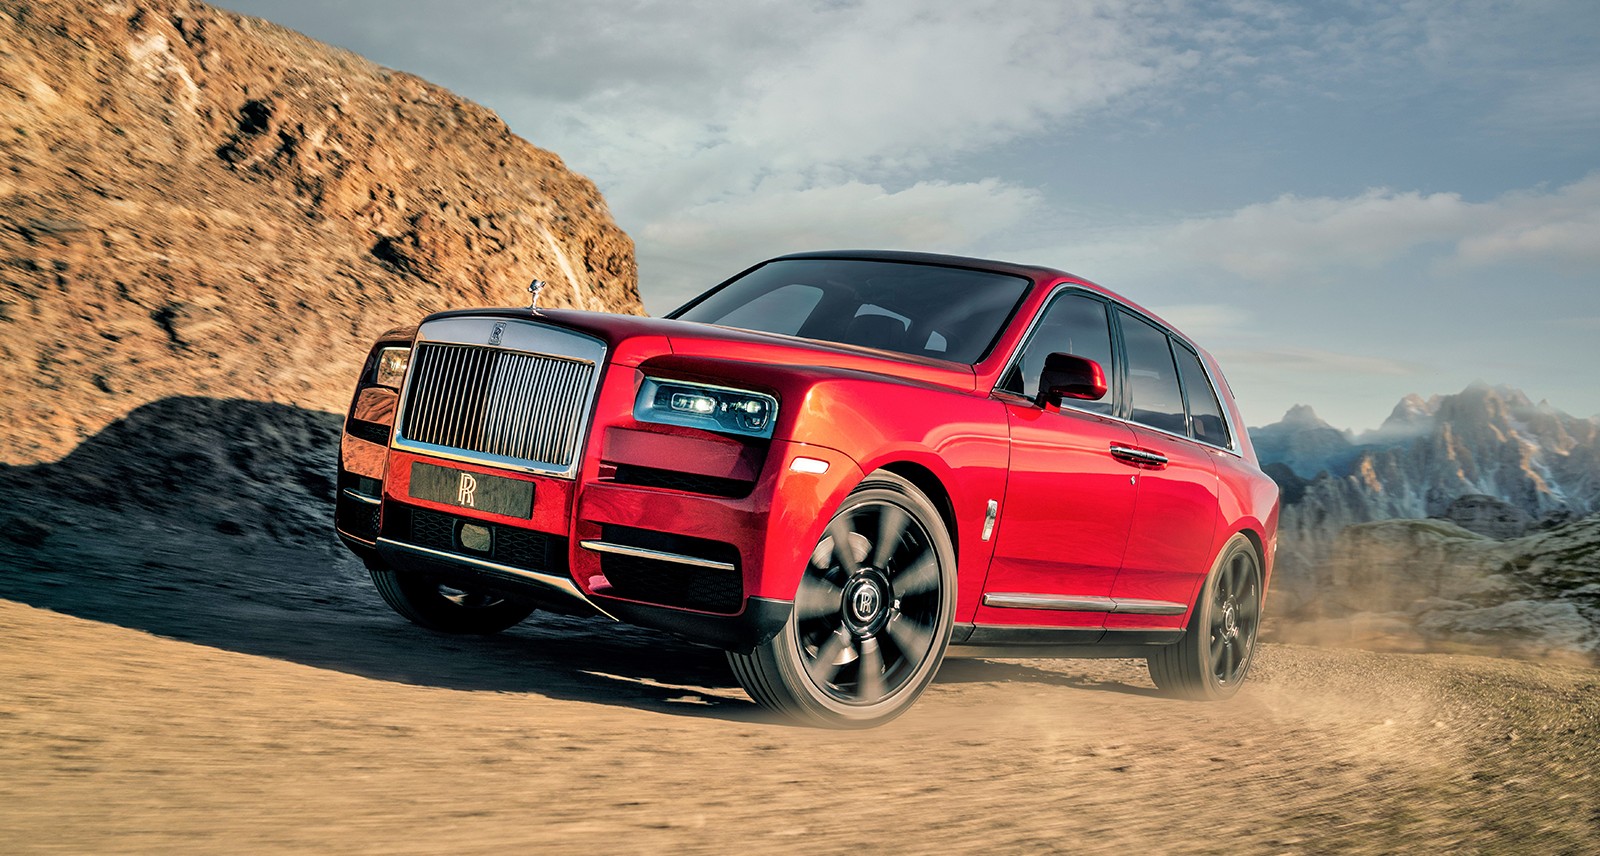 Rolls-Royce Has Unveiled the Cullinan, Its Massive, Ridiculously Luxurious SUV